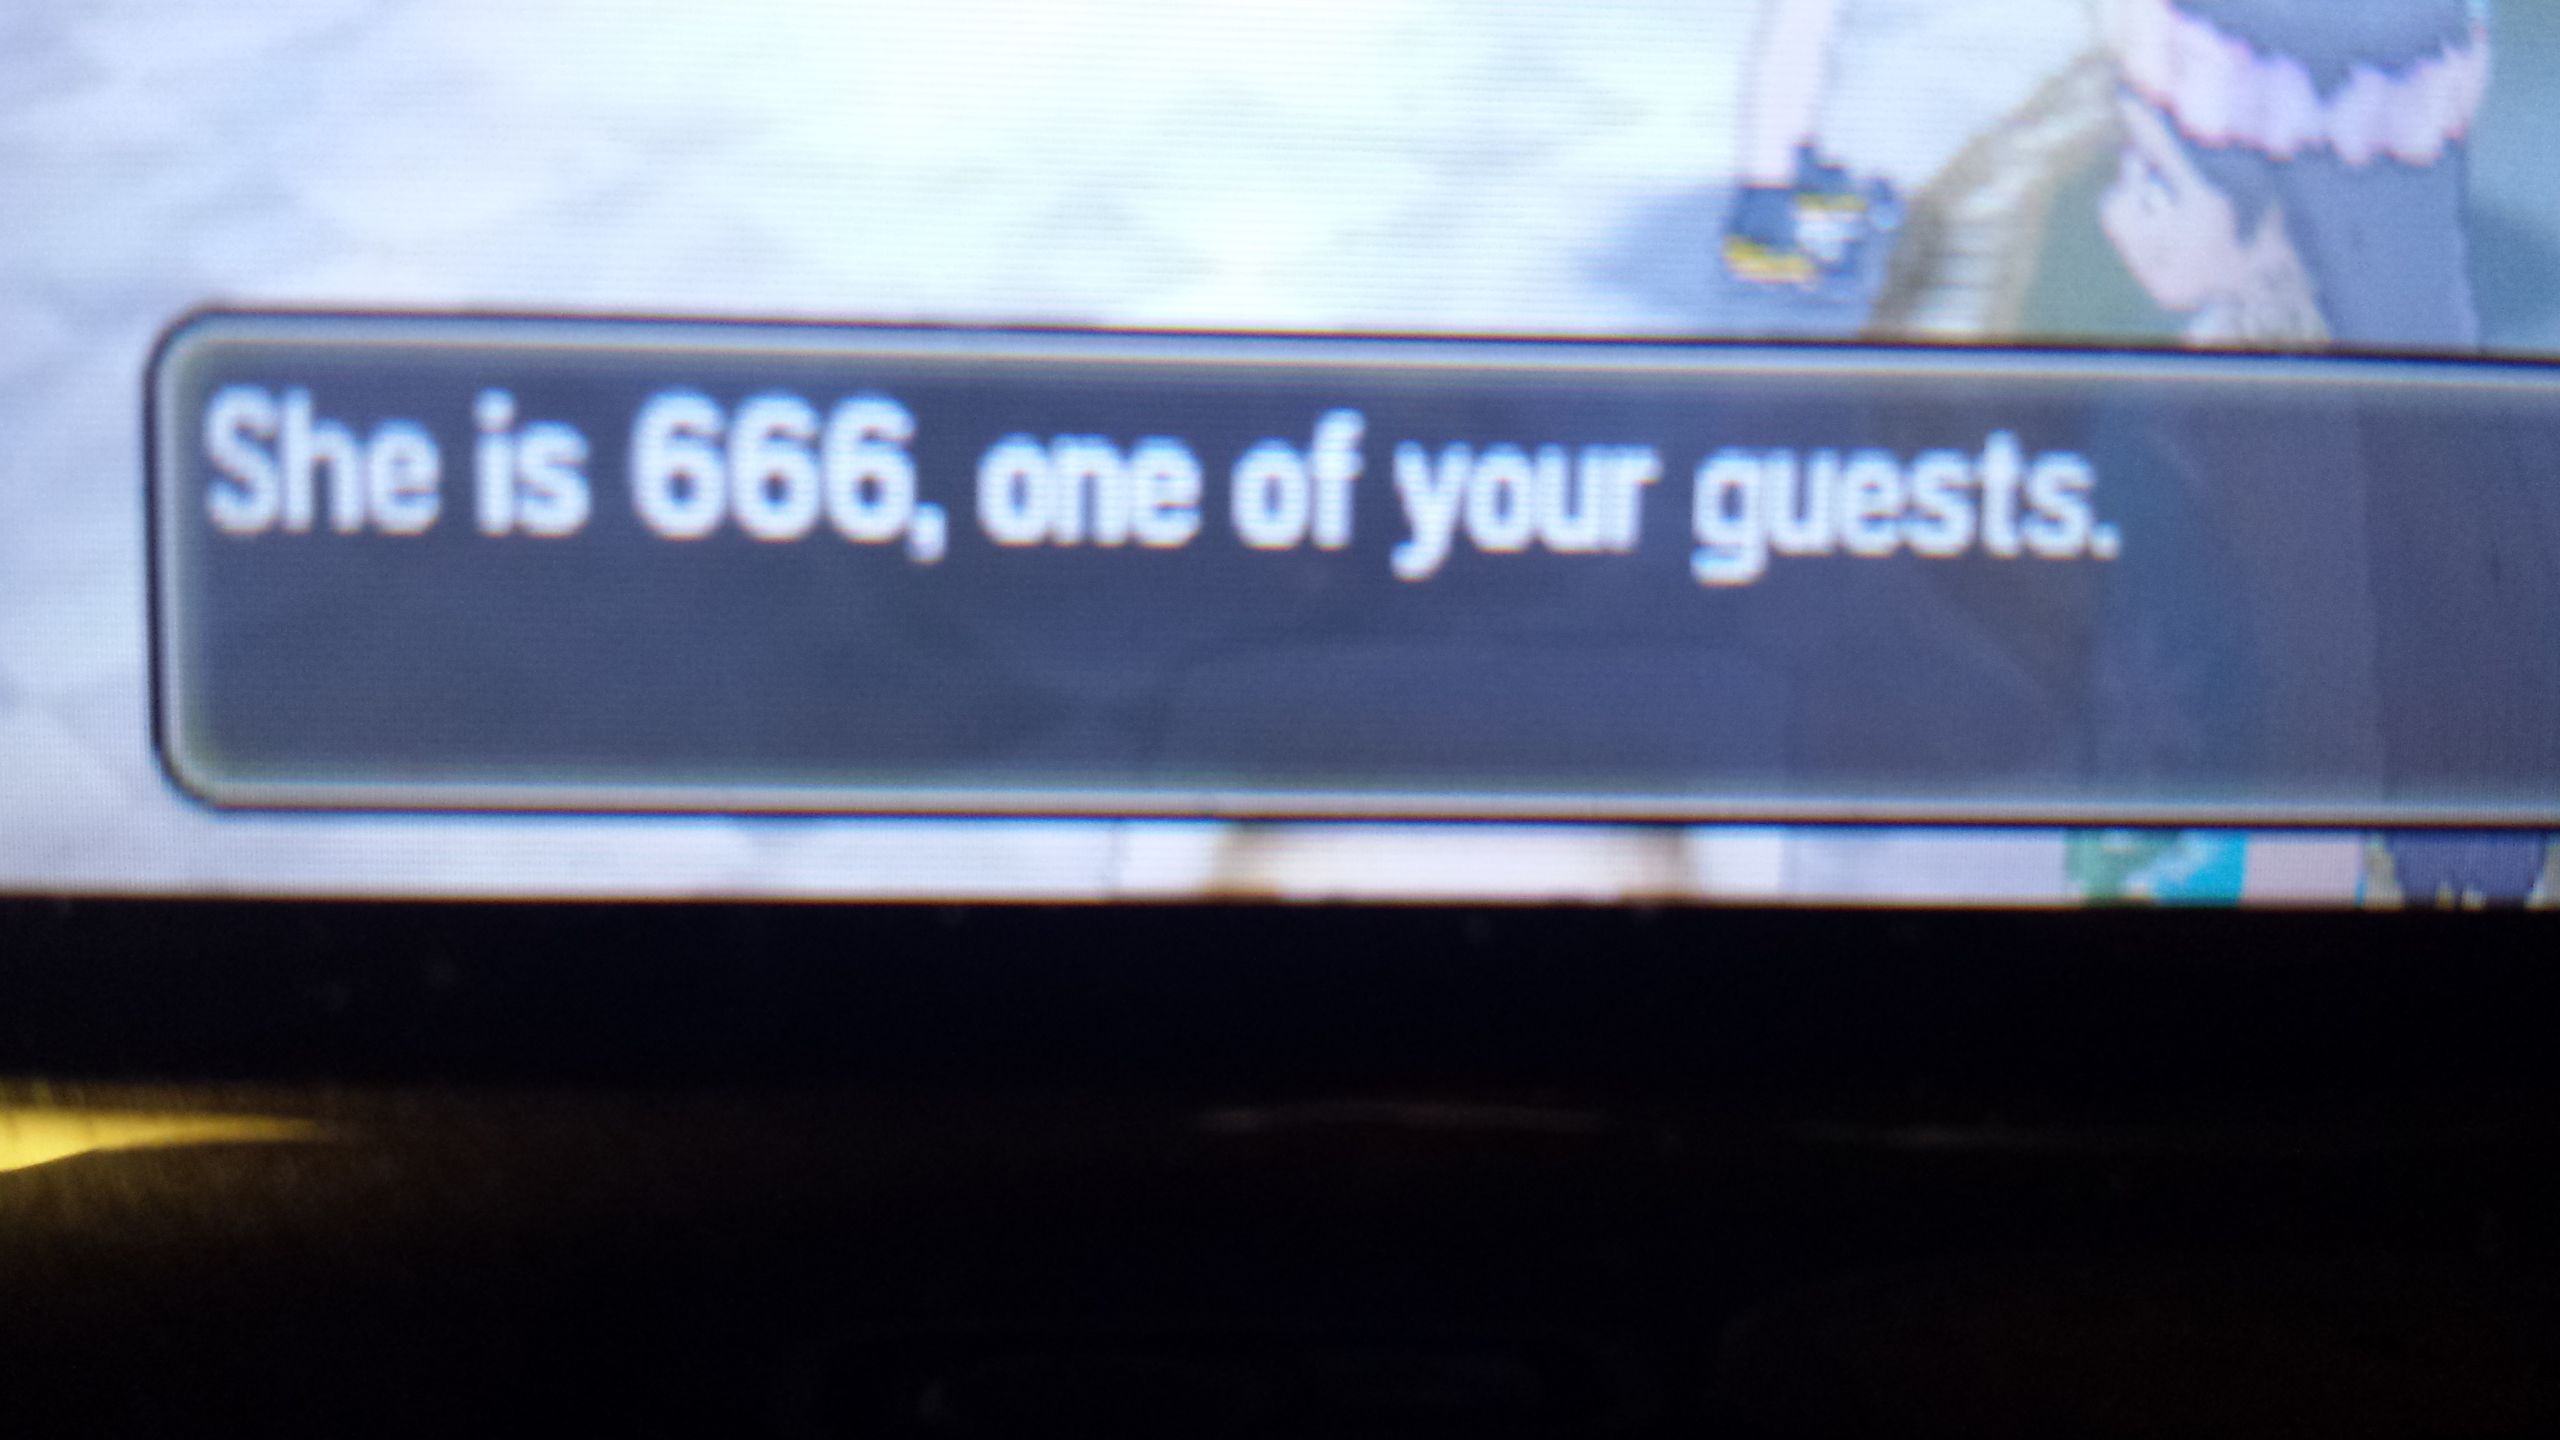 High Quality 666 guest Blank Meme Template